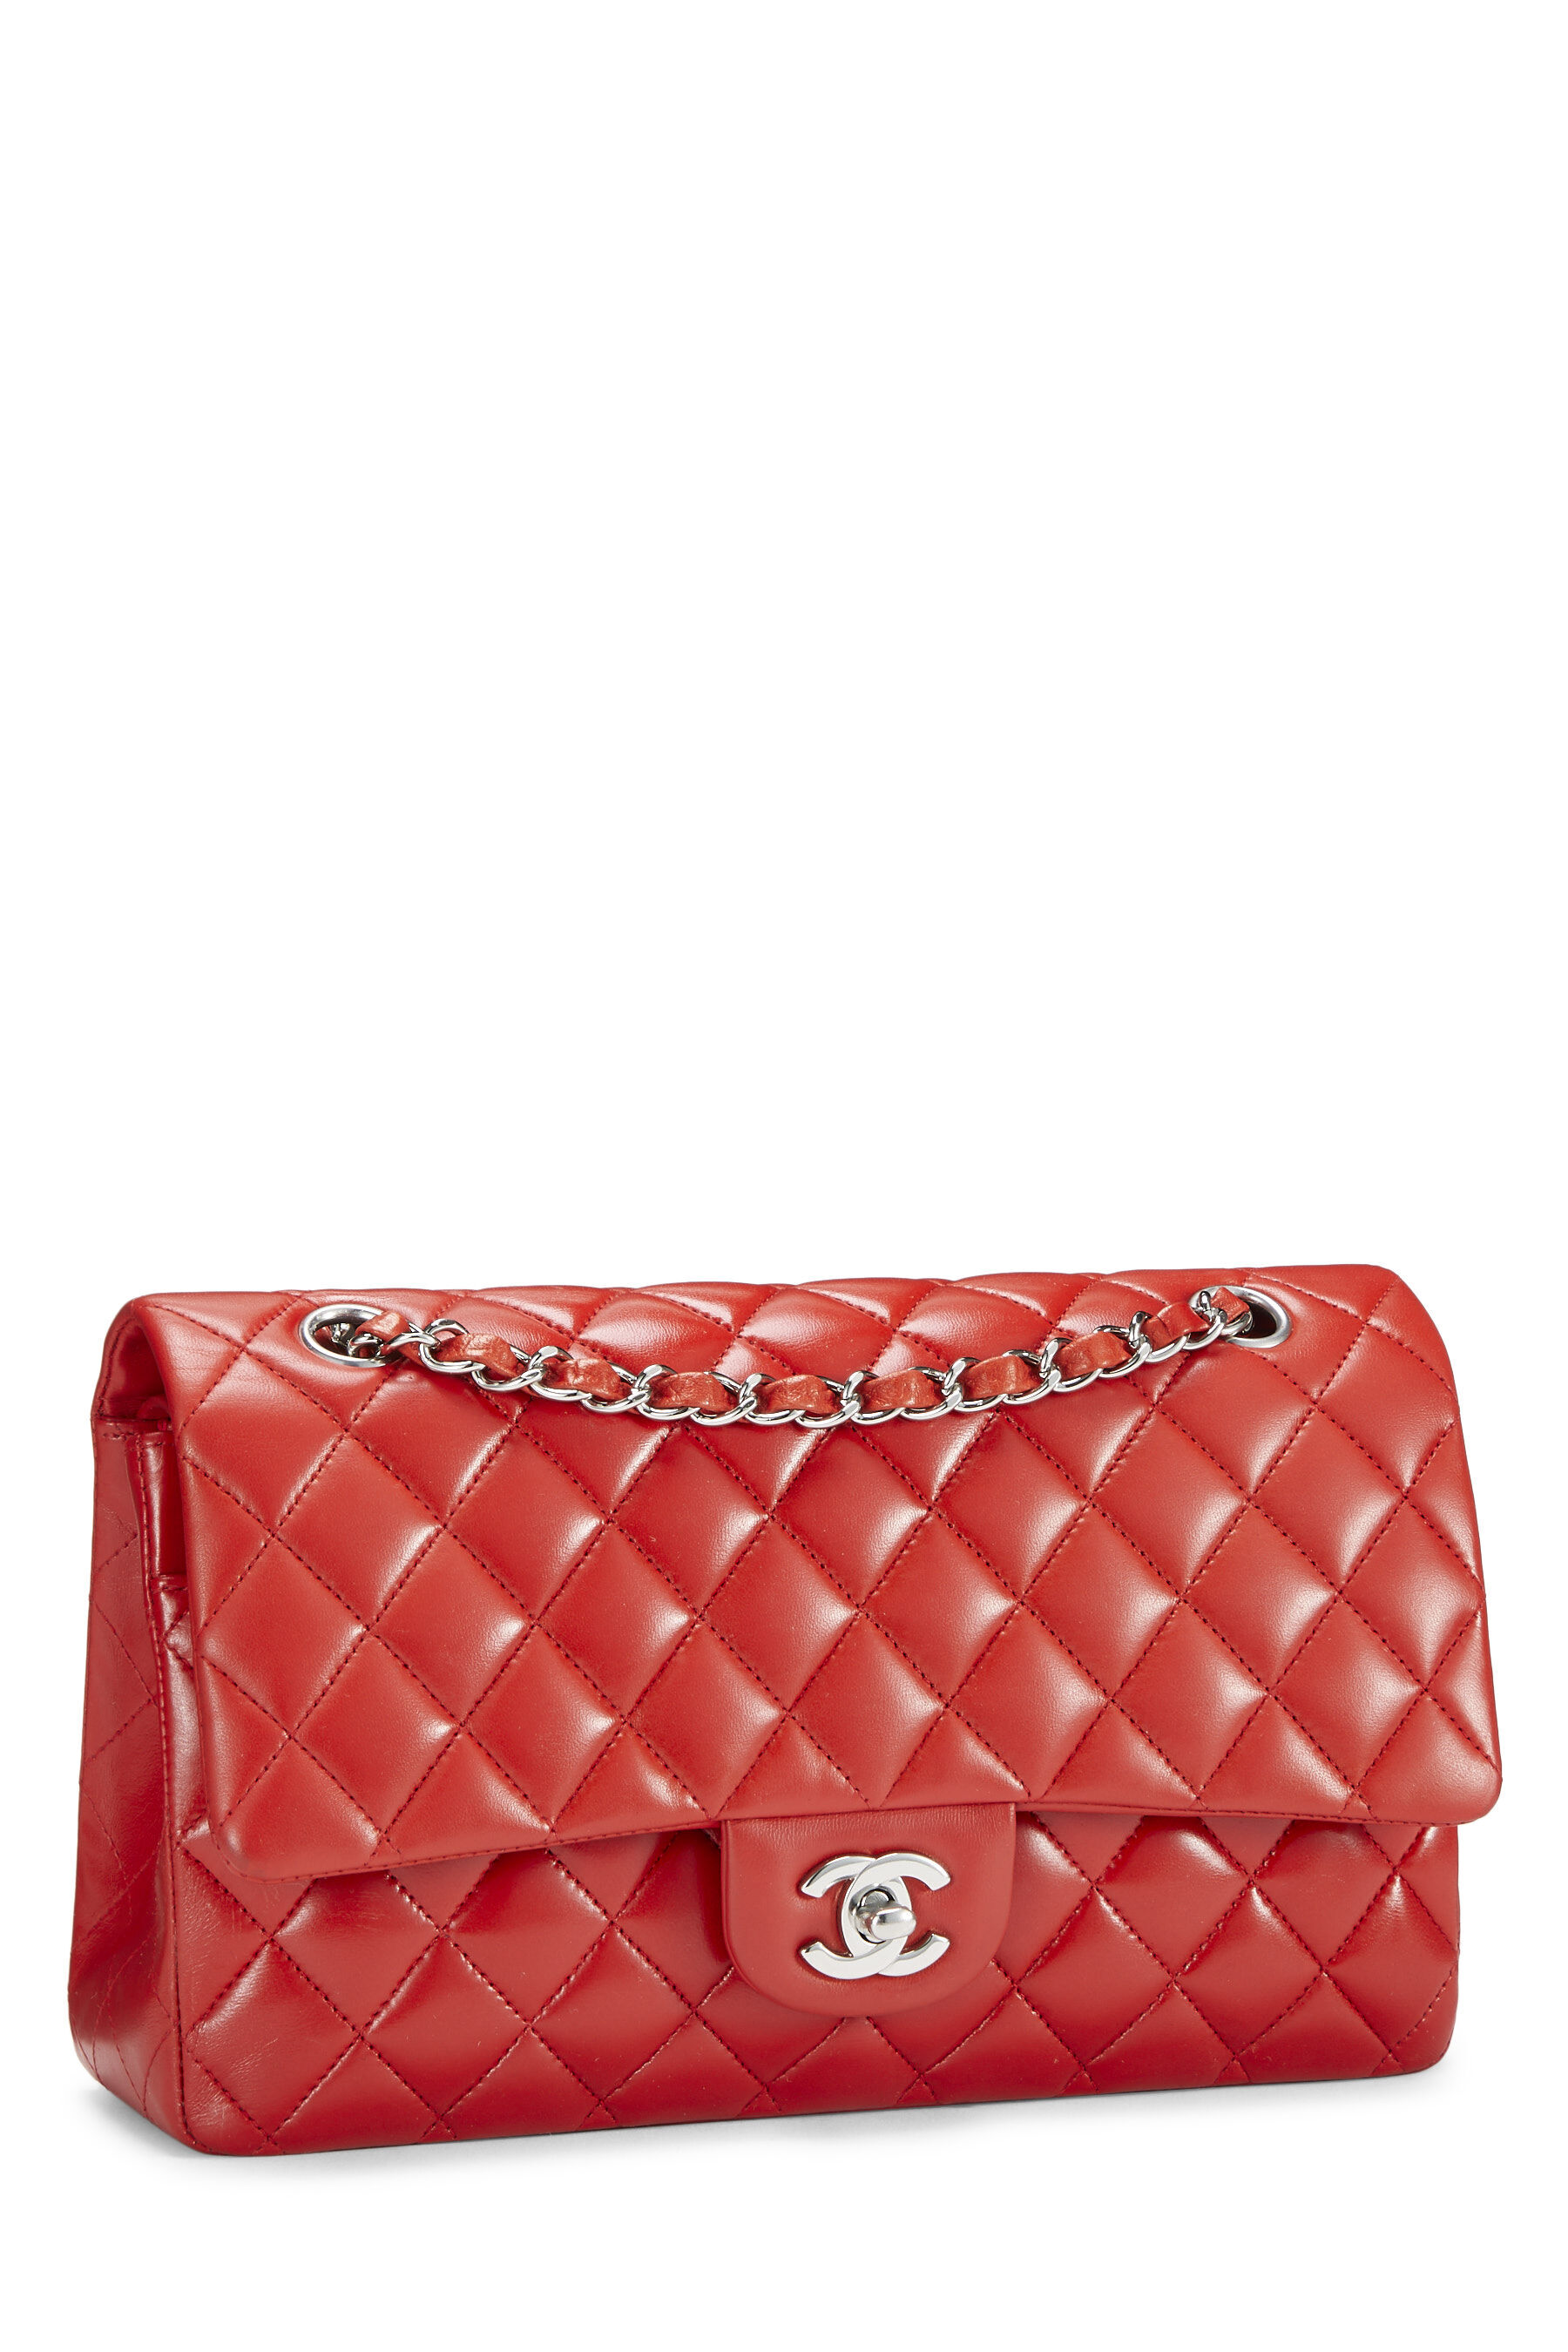 Chanel Classic ML Medium Double Flap Red Caviar Gold Hardware  Coco  Approved Studio